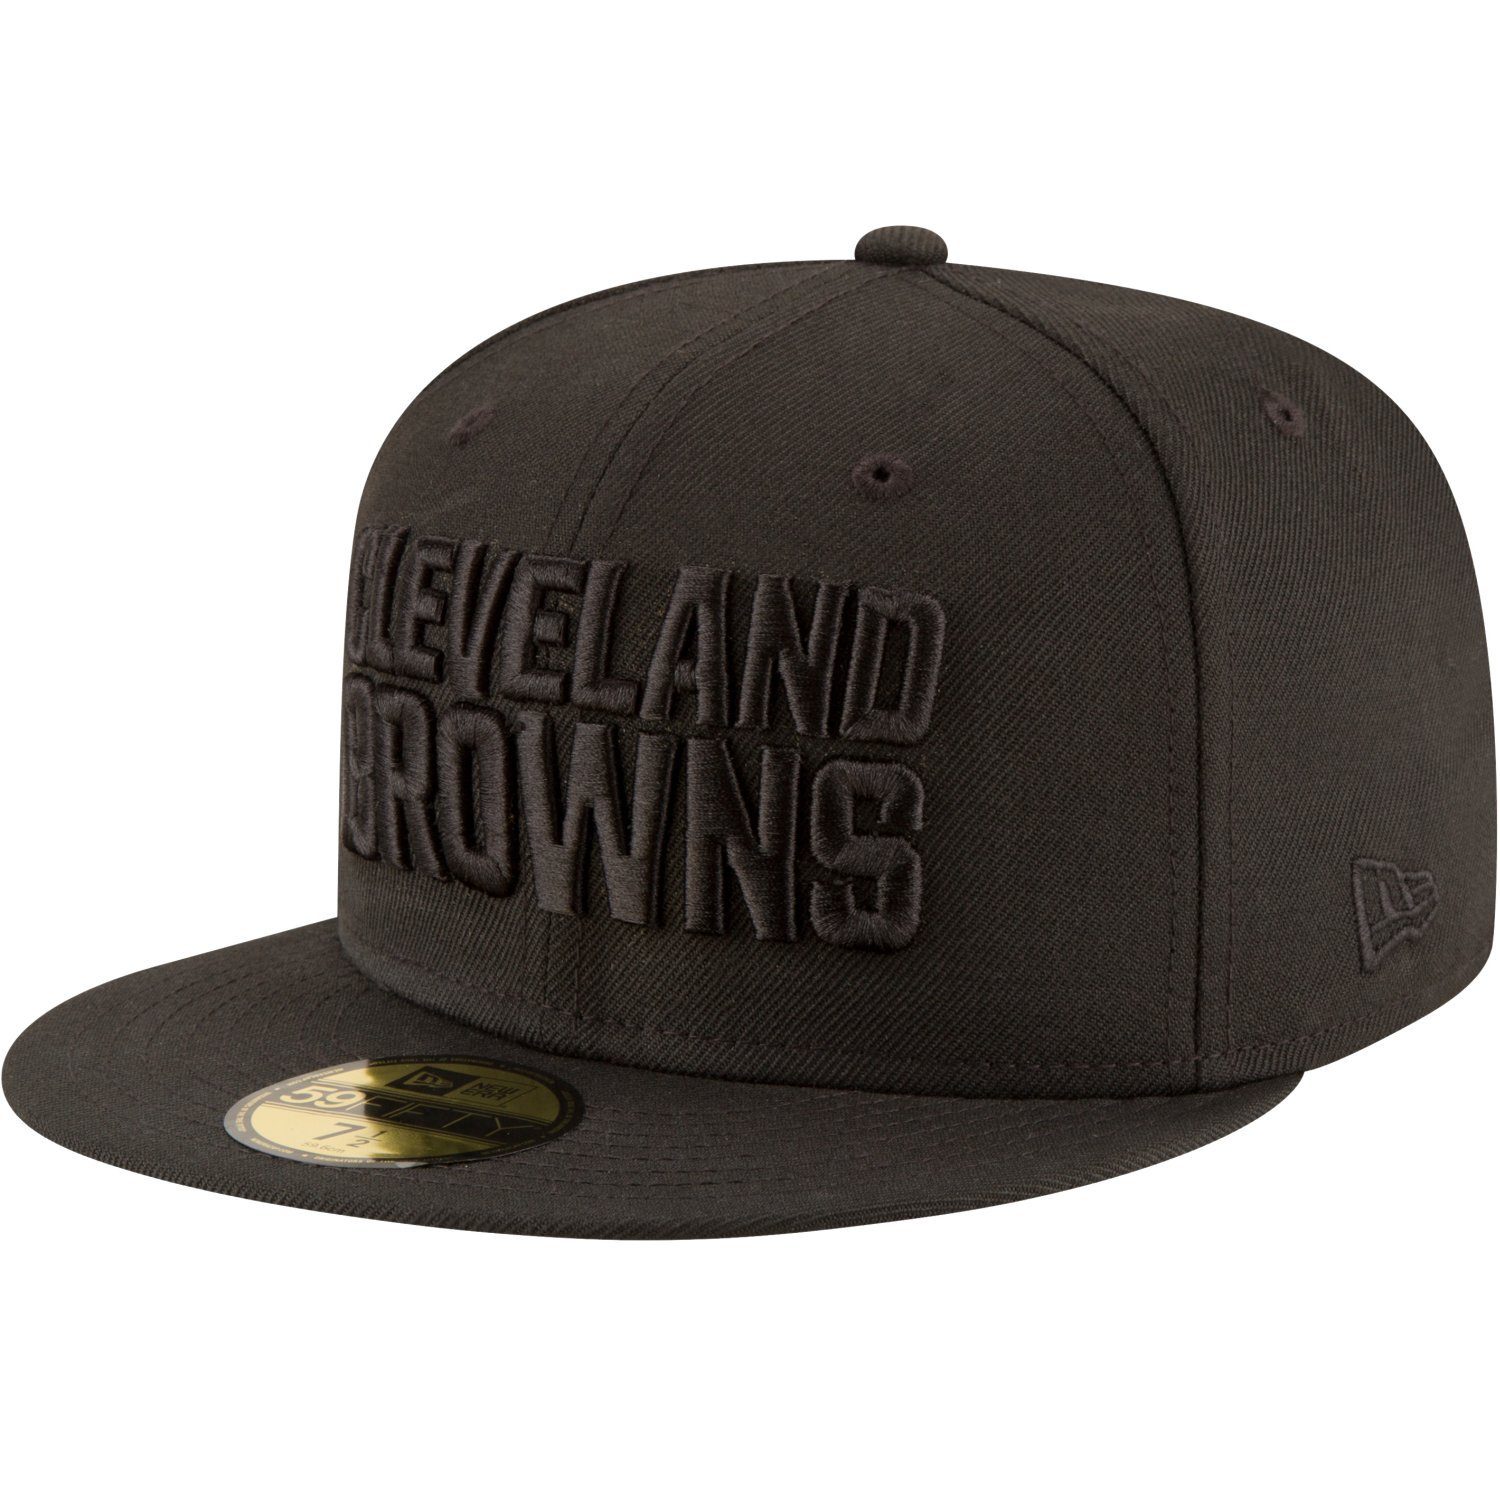 New Era Fitted Cap 59Fifty NFL Cleveland Browns